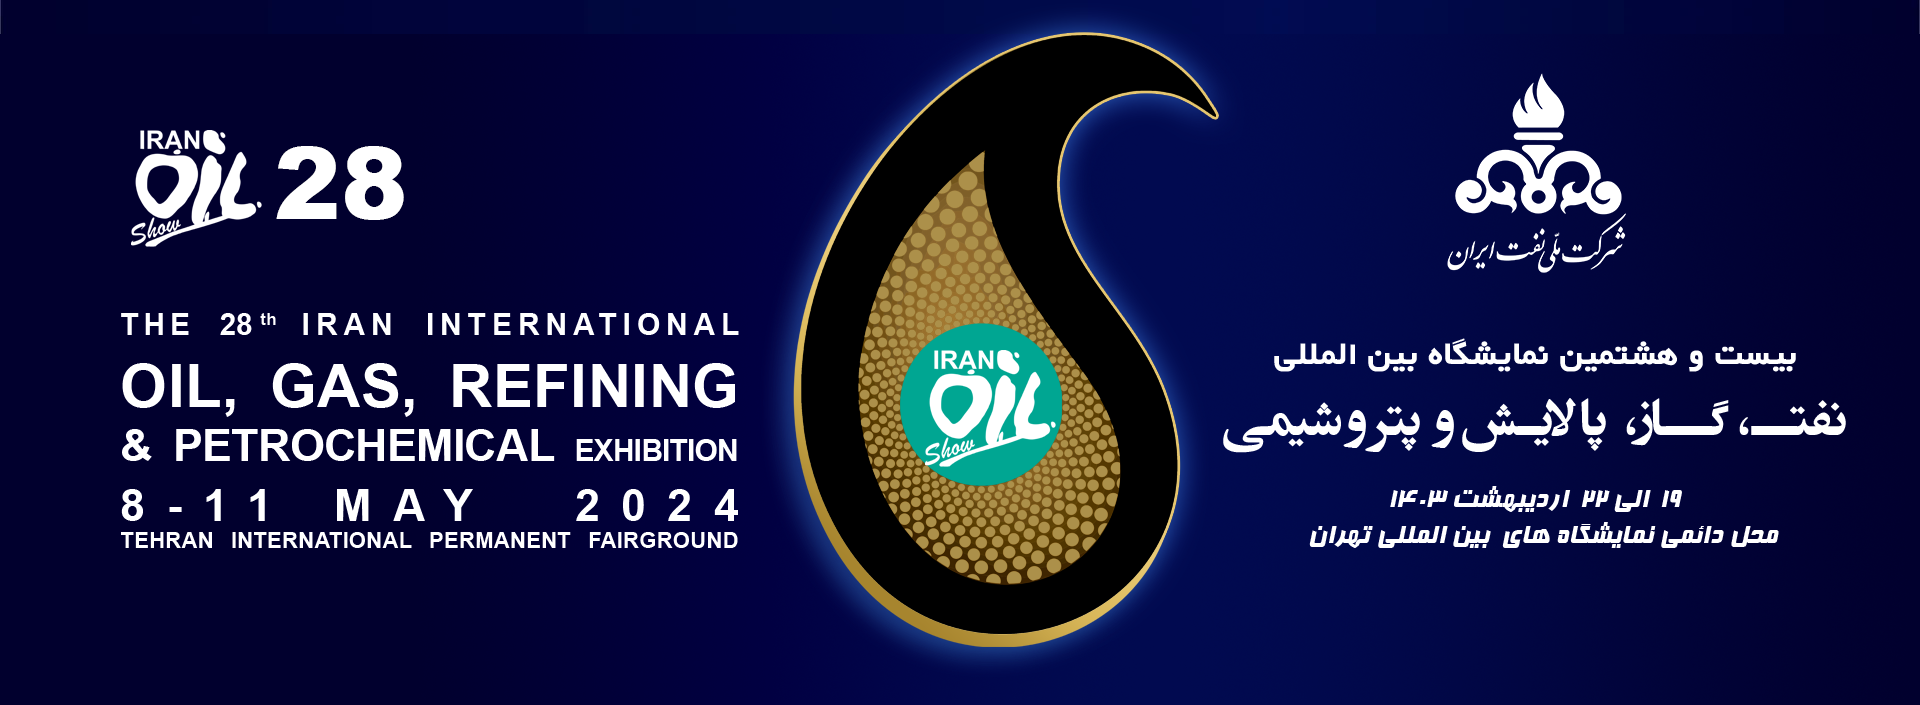 file1708254244 - The 28th International Oil and Gas Exhibition 2024 in Iran/Tehran